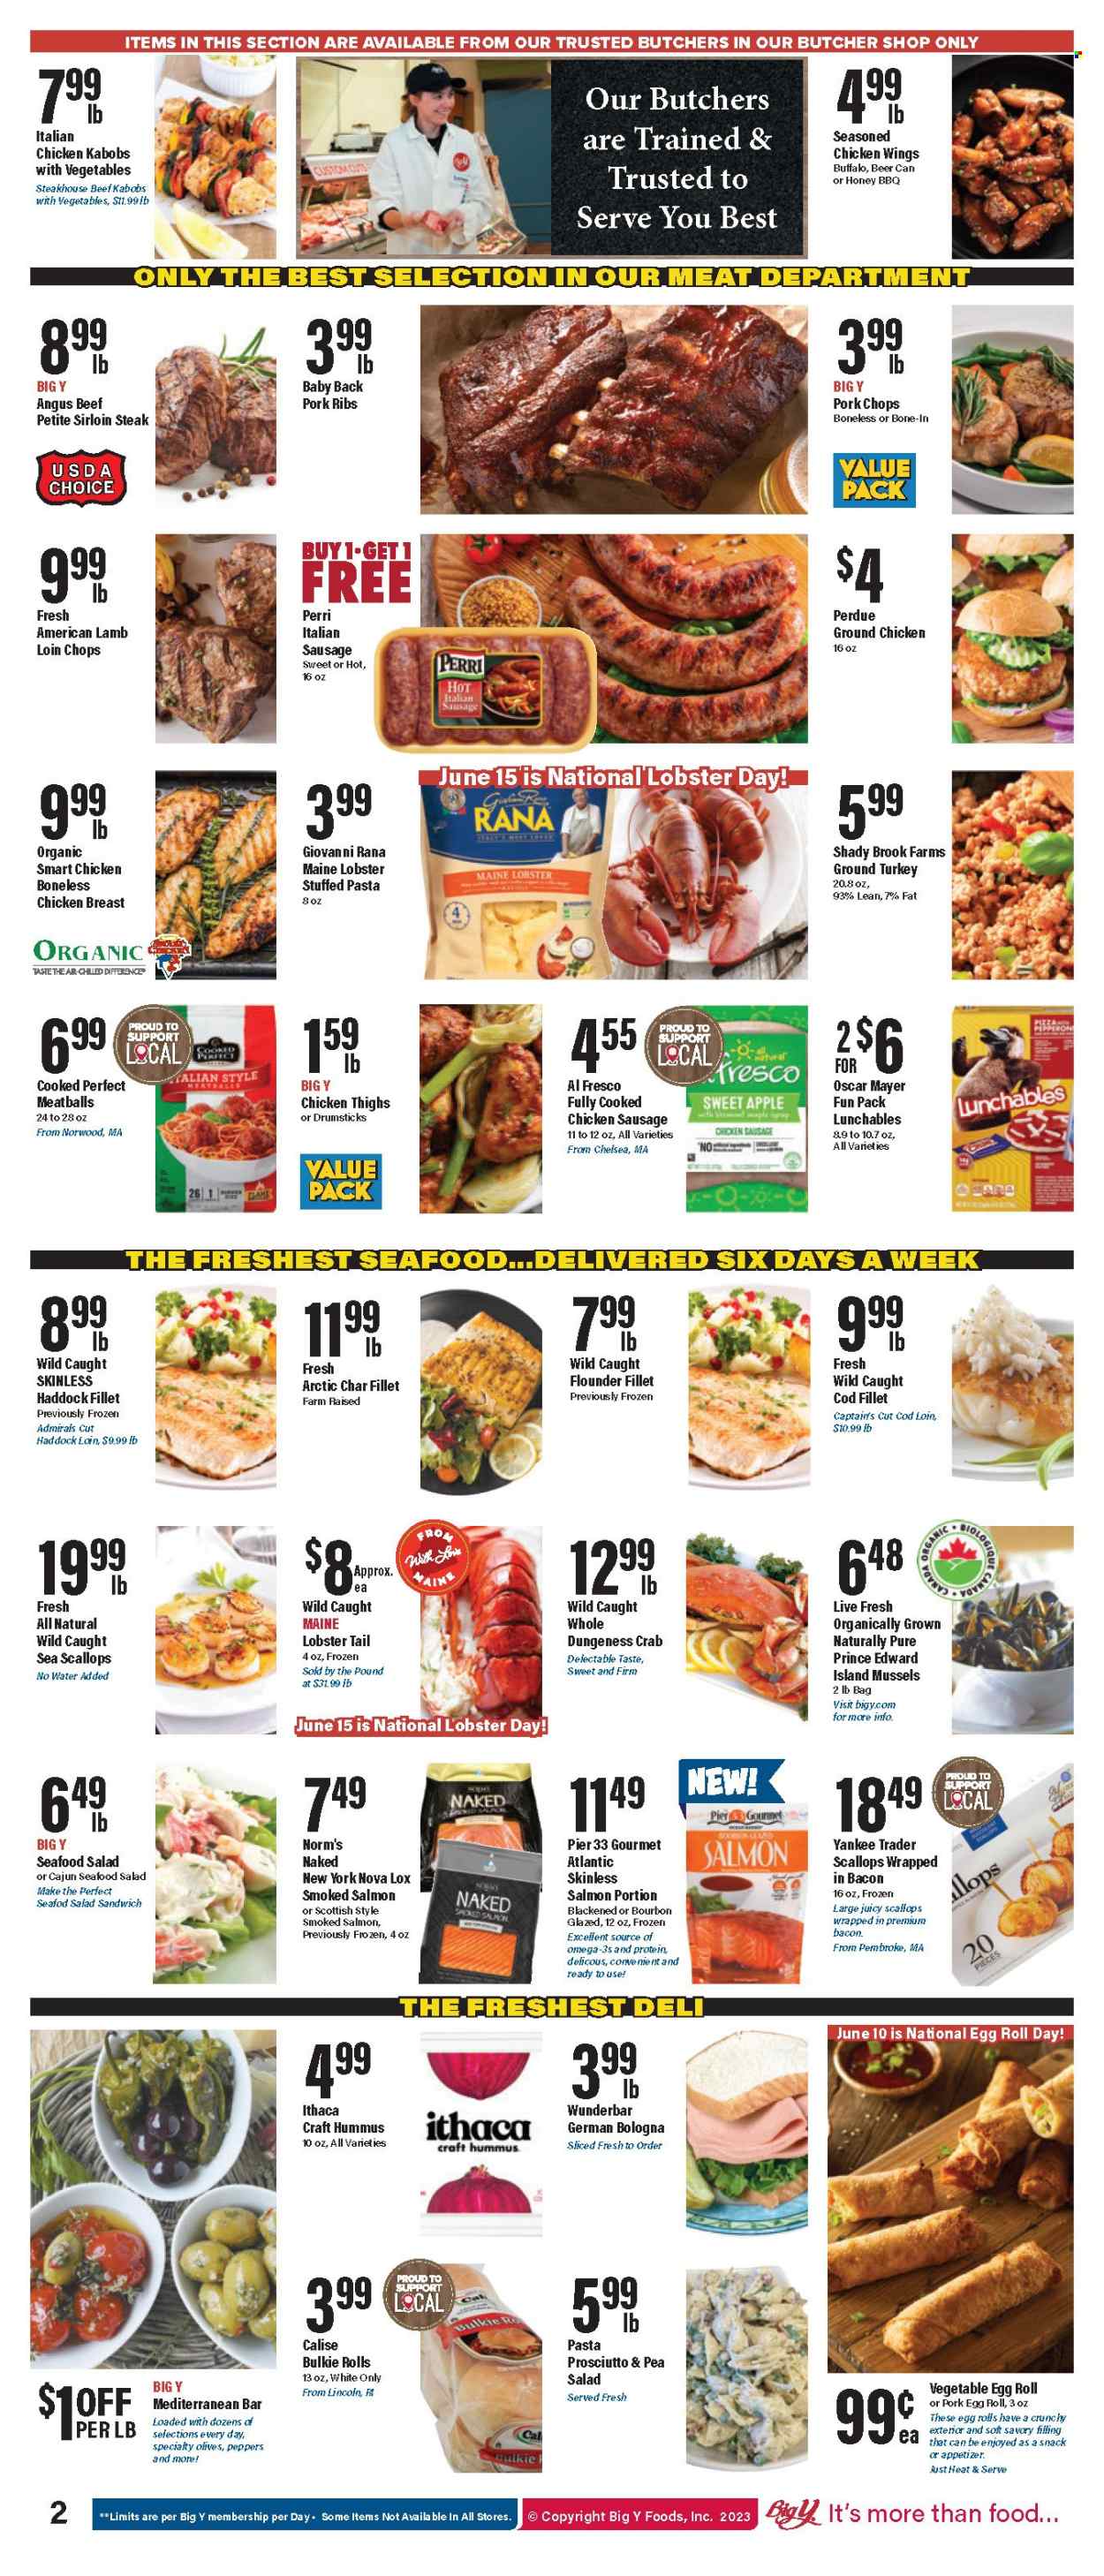 thumbnail - Big Y Flyer - 06/08/2023 - 06/14/2023 - Sales products - bacon wrapped scallops, cod, flounder, lobster, mussels, salmon, scallops, smoked salmon, haddock, seafood, crab, lobster tail, meatballs, sandwich, pasta, egg rolls, Giovanni Rana, Perdue®, Lunchables, Rana, ready meal, bacon, prosciutto, snack, german bologna, Oscar Mayer, chicken sausage, italian sausage, hummus, seafood salad, chicken wings, olives, maple syrup, syrup, water, alcohol, beer, ground chicken, ground turkey, chicken breasts, chicken thighs, turkey, beef meat, beef sirloin, steak, sirloin steak, ribs, pork chops, pork meat, pork ribs, pork back ribs, lamb loin, lamb meat. Page 4.